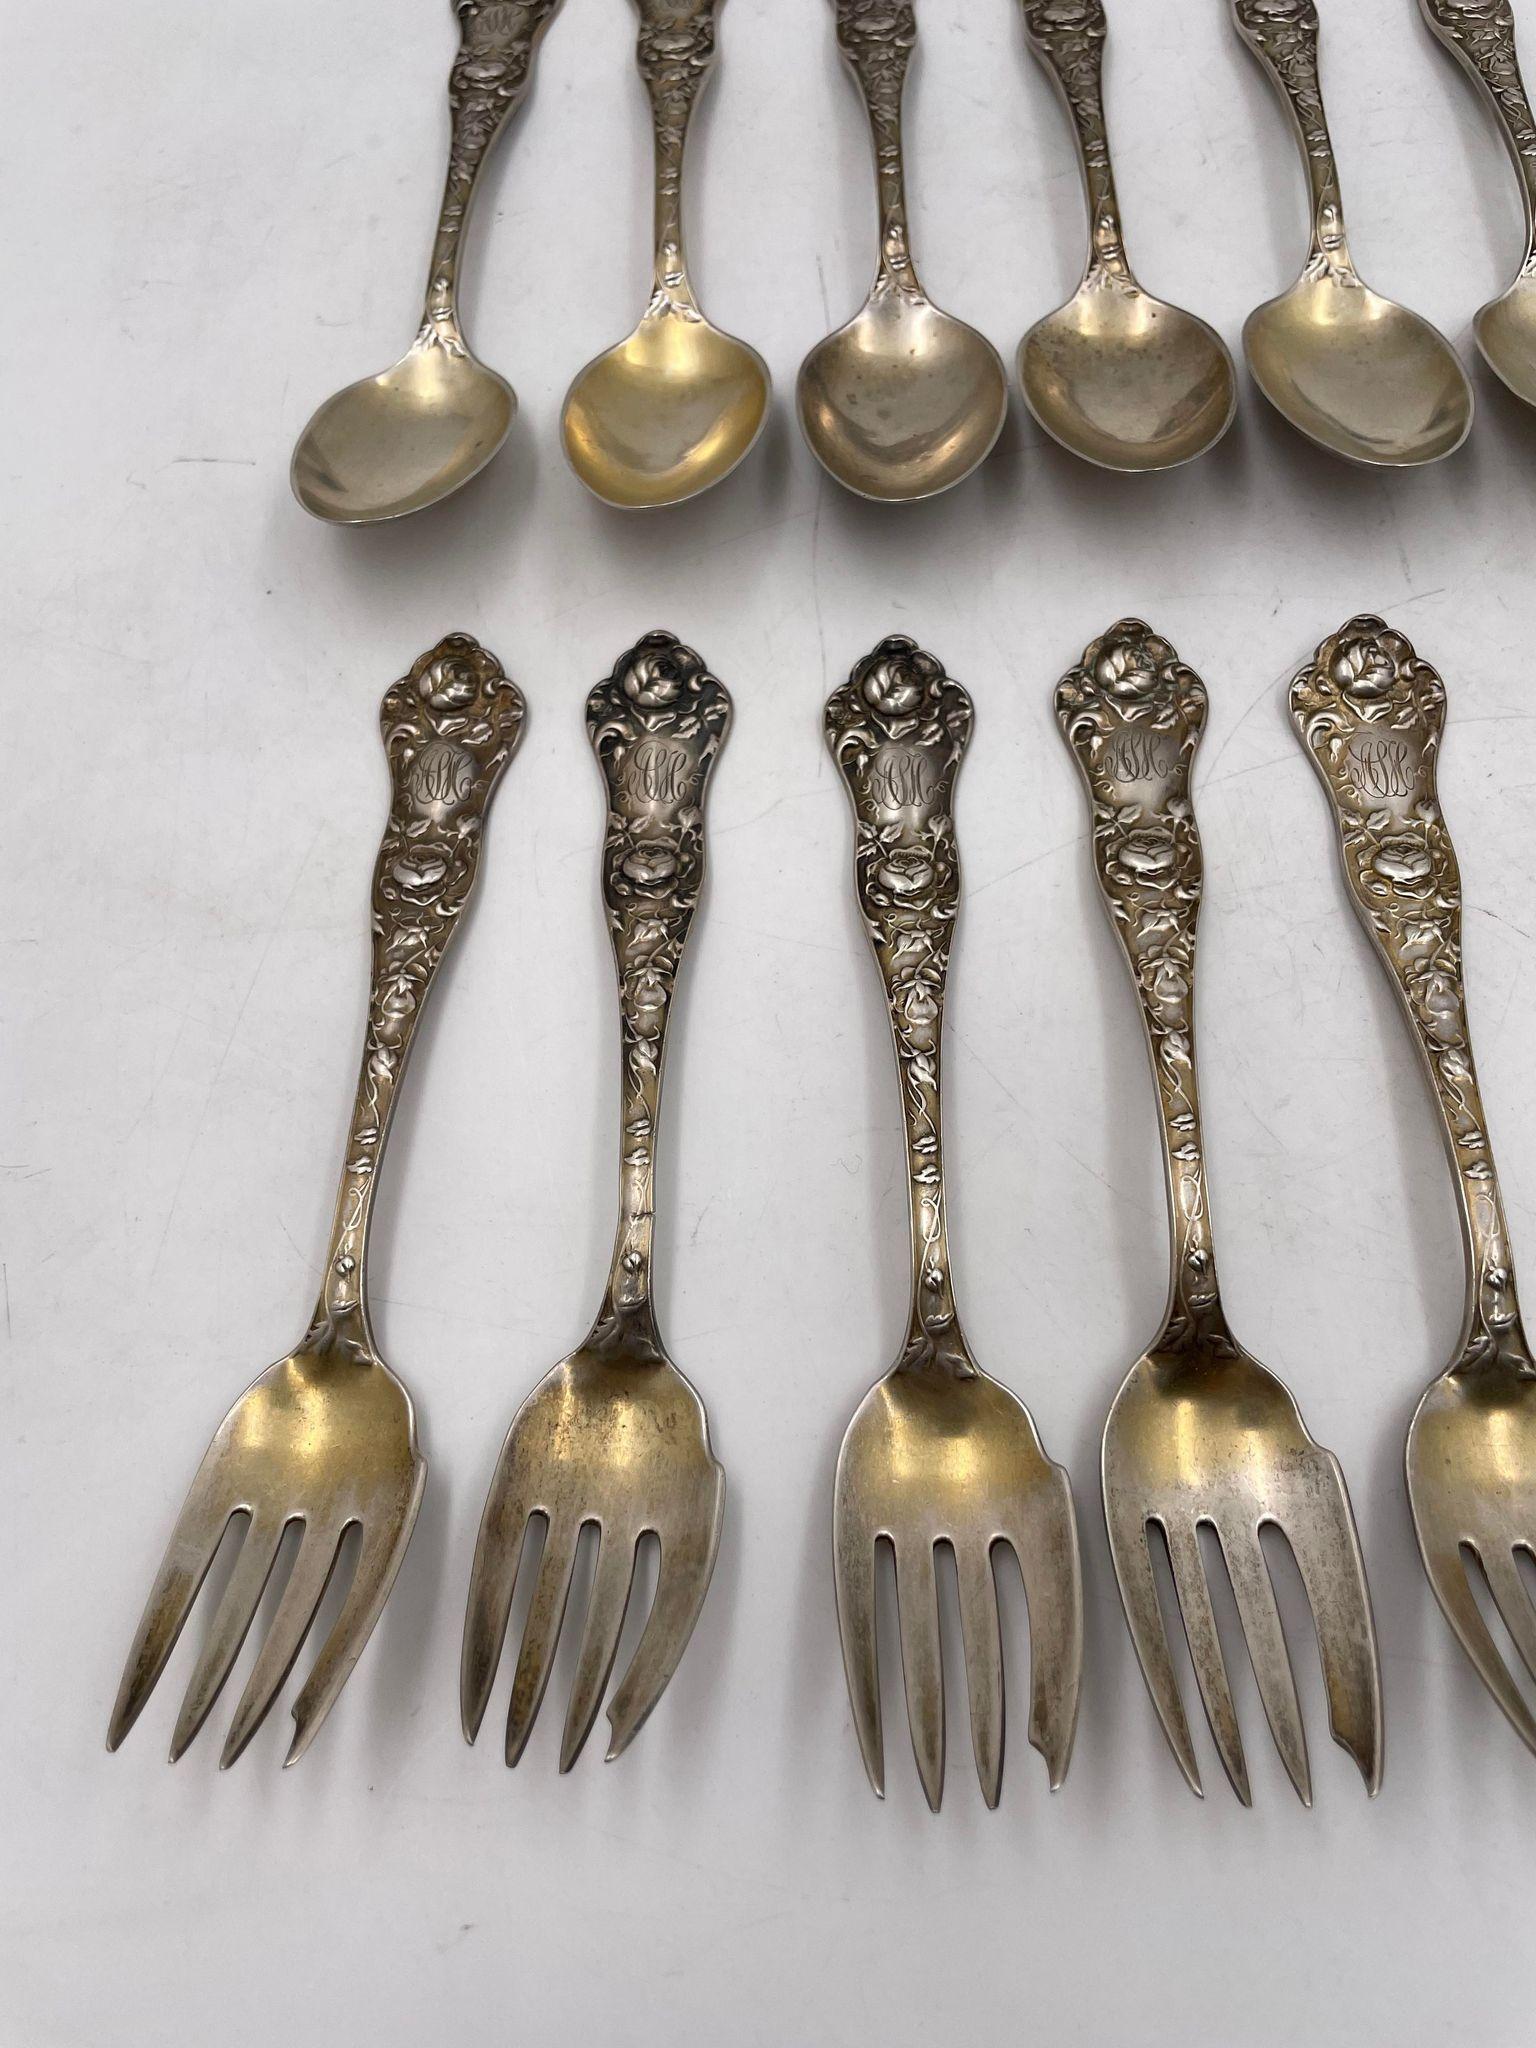 Shiebler sterling silver 24-piece flatware set in American Beauty pattern with original gilding. This set contains 6 cocktail forks with gilding (6 in), 5 dessert forks (6 in), 6 bowl table spoons with gilding (8.75 in), 6 teaspoons (8.75 in), and 1